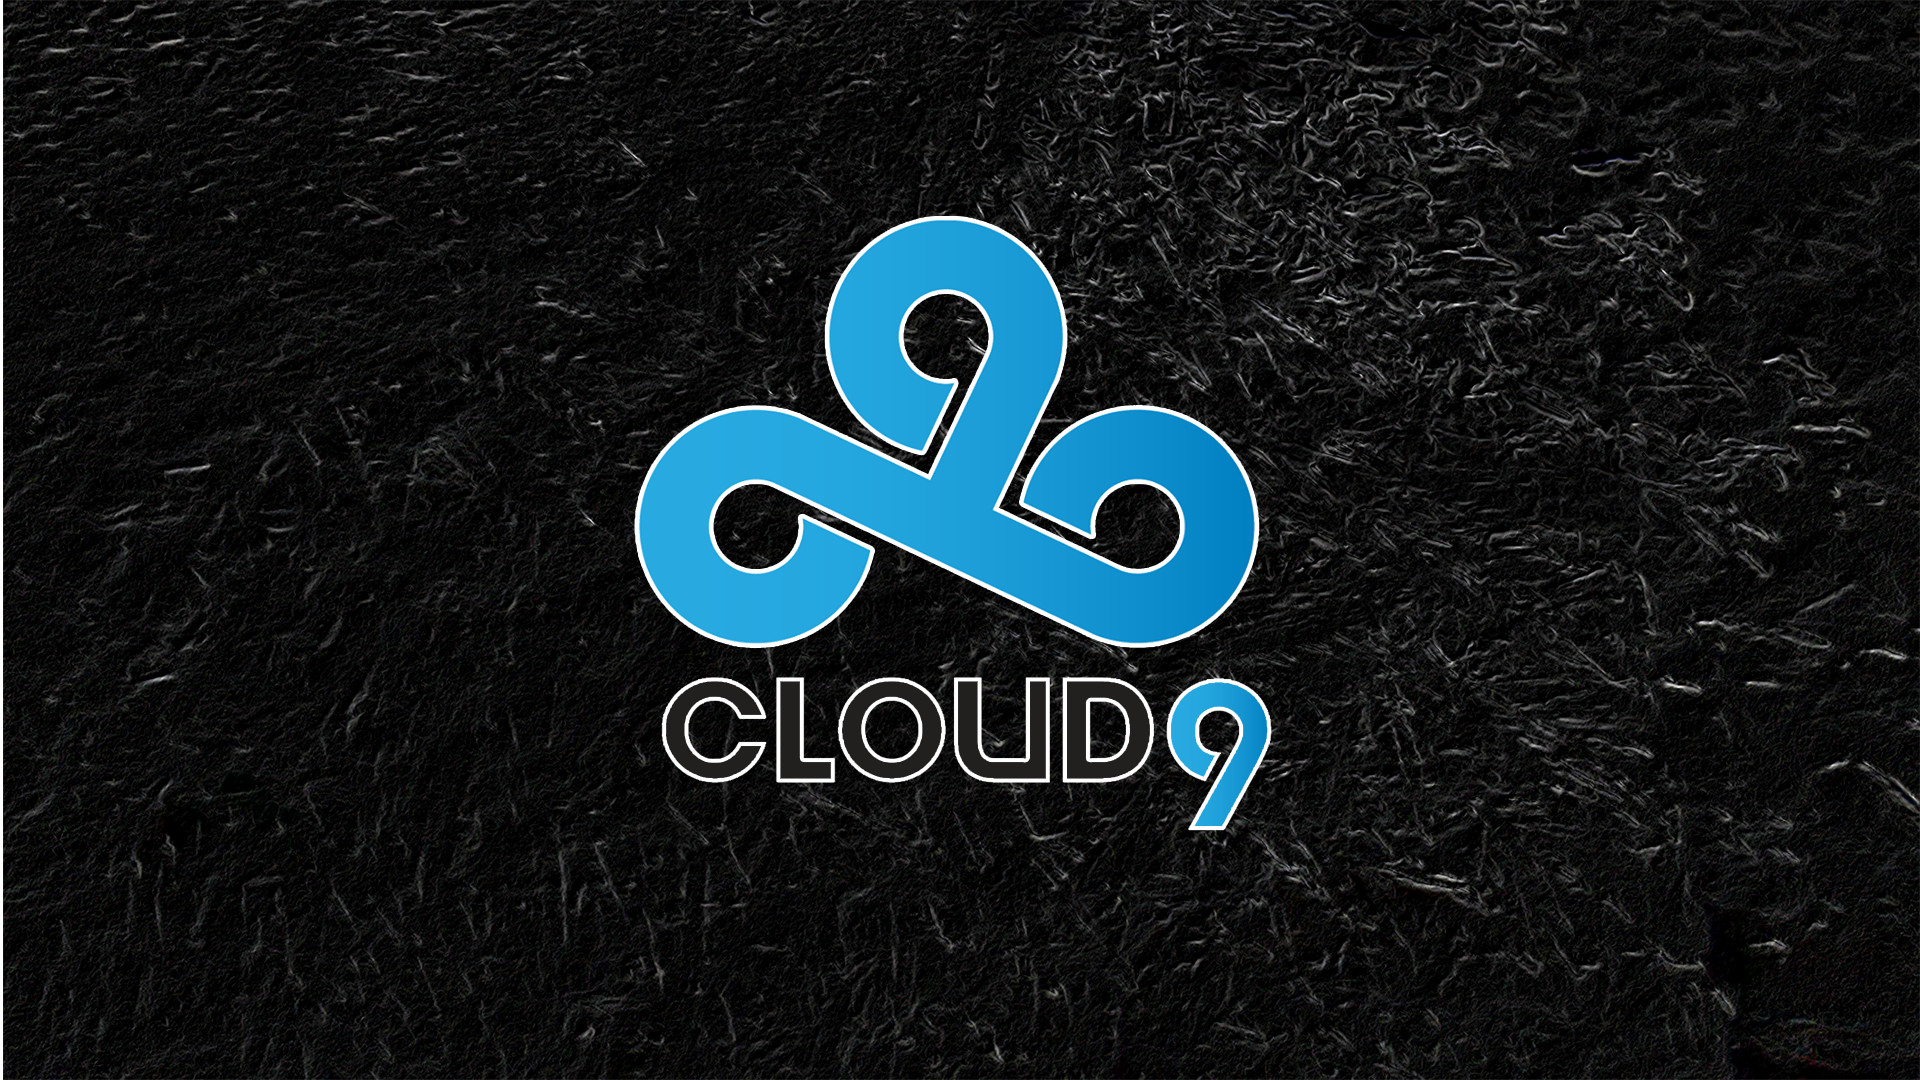 1920x1080 Cloud9 CS:GO and LoL Wallpaper HD by toskevdesing on DeviantArt